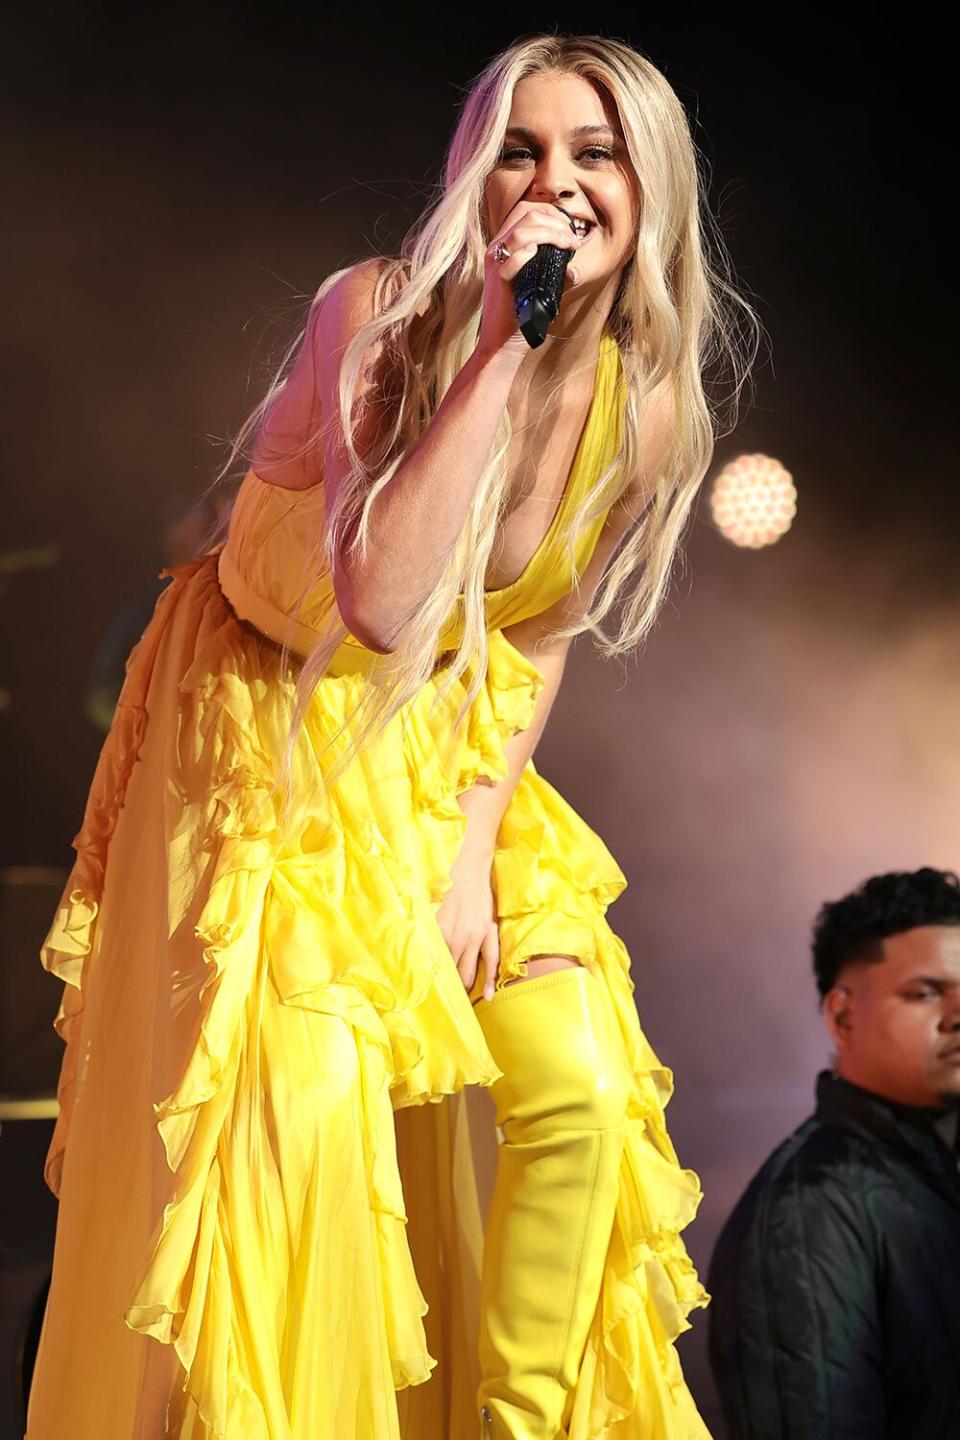 Kelsea Ballerini performs onstage during The Heart First Tour at Radio City Music Hall on September 24, 2022 in New York City.